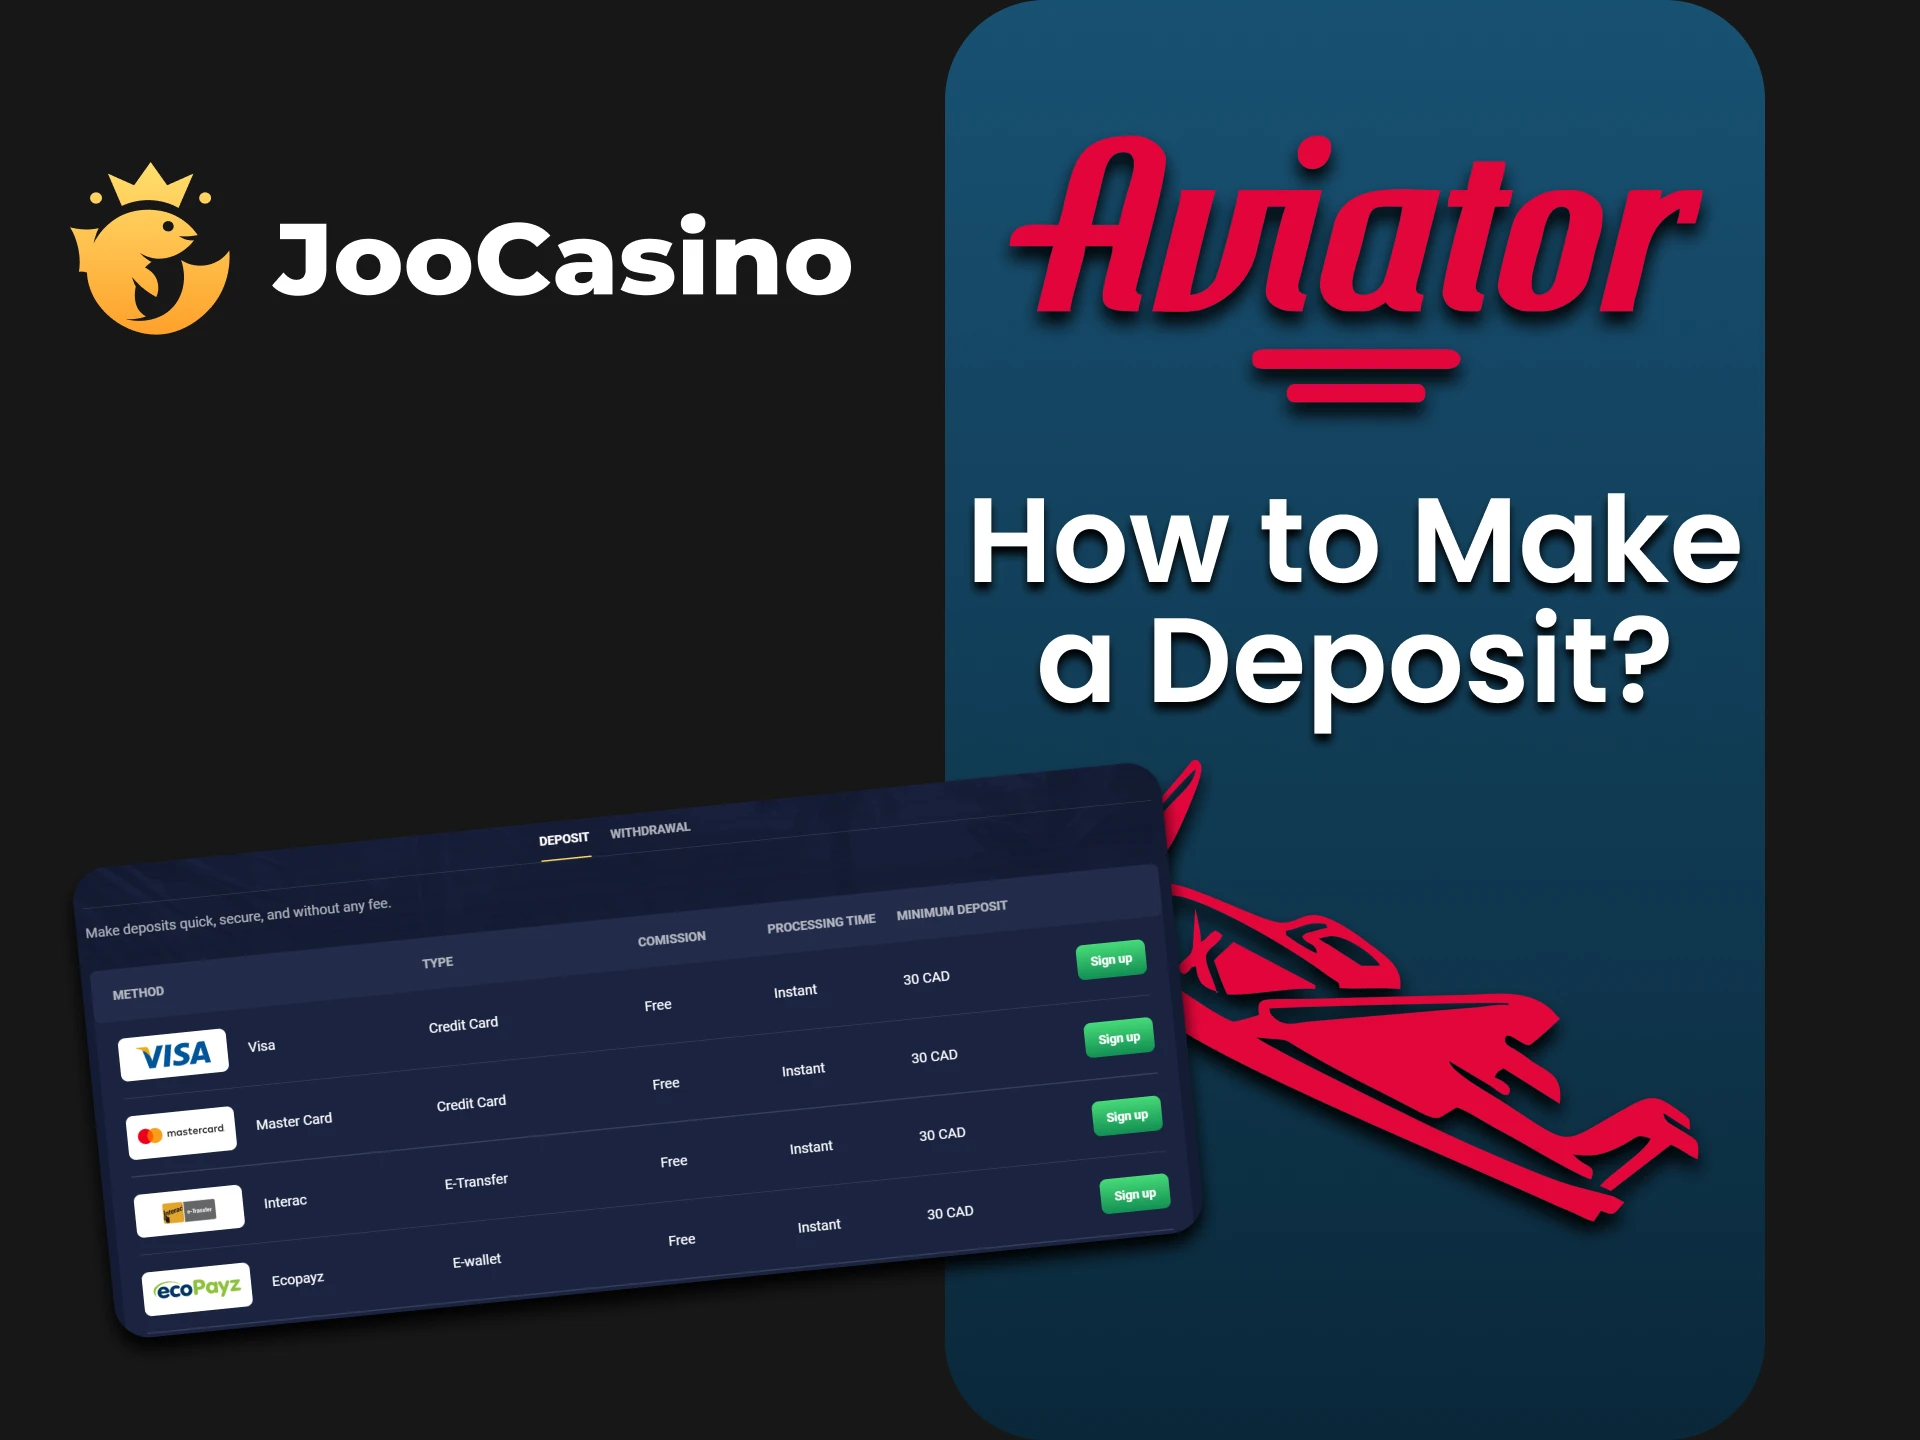 We will tell you how to top up your funds for the Aviator game at Joo Casino.